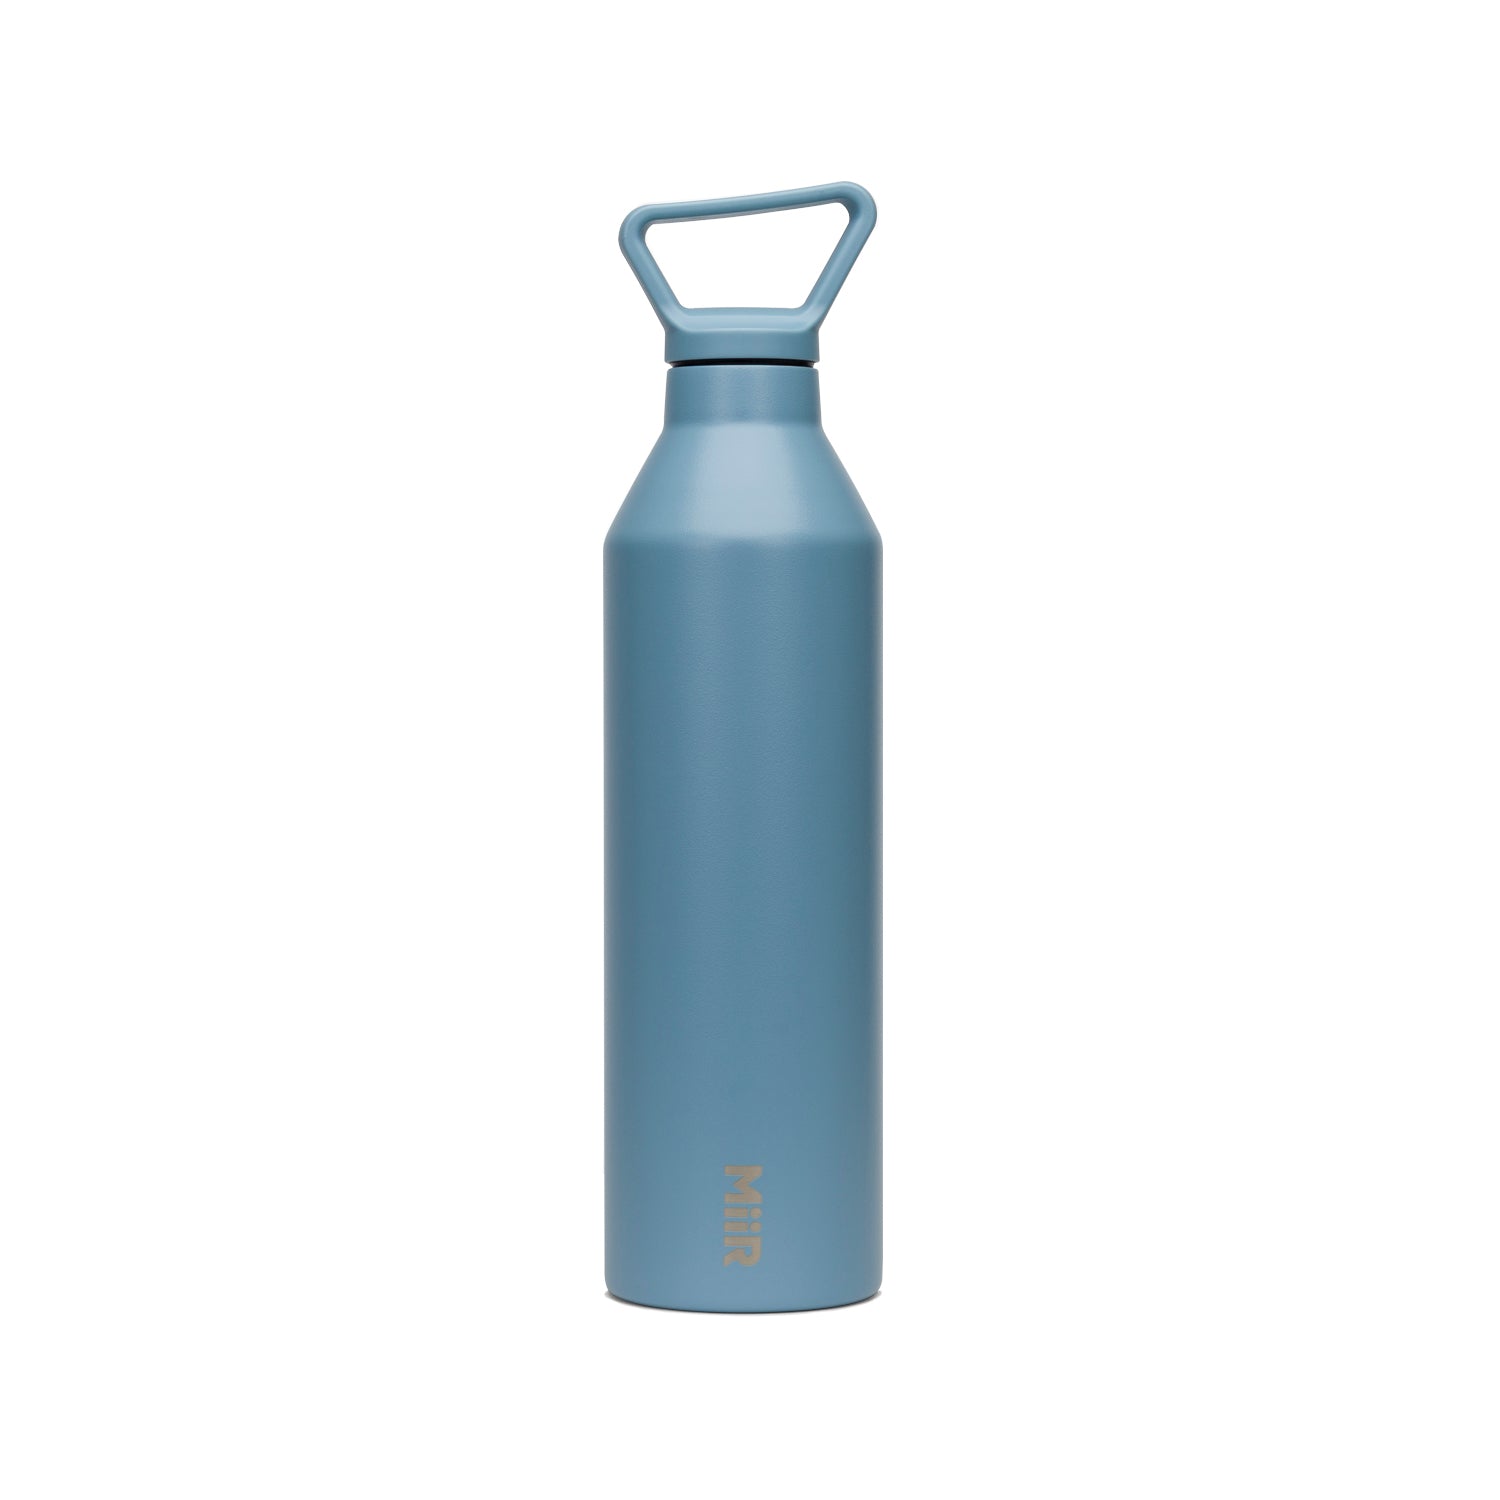 Just Like Me Boy Light Blue Thermos Bottle